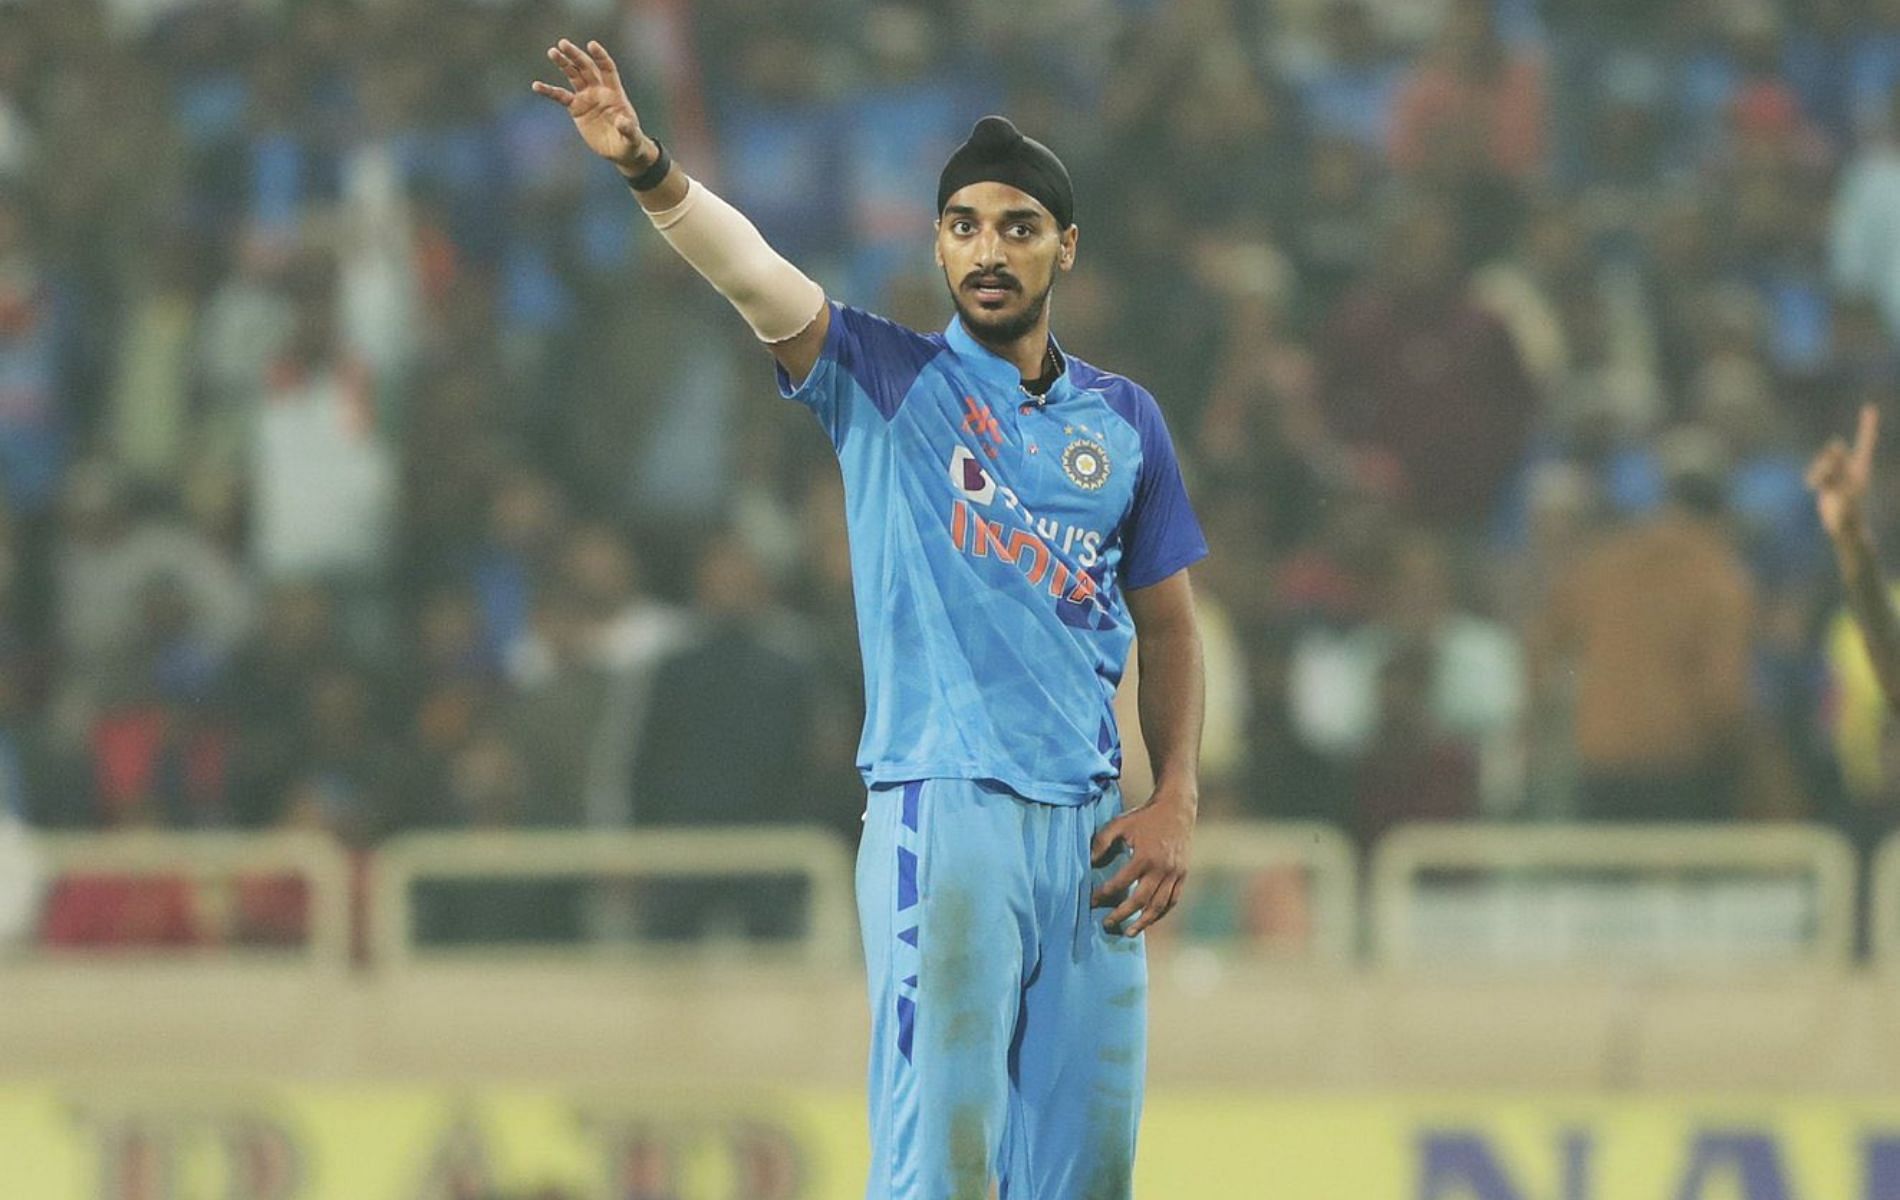 Arshdeep Singh finished with figures of 1/51. (Pic: BCCI)